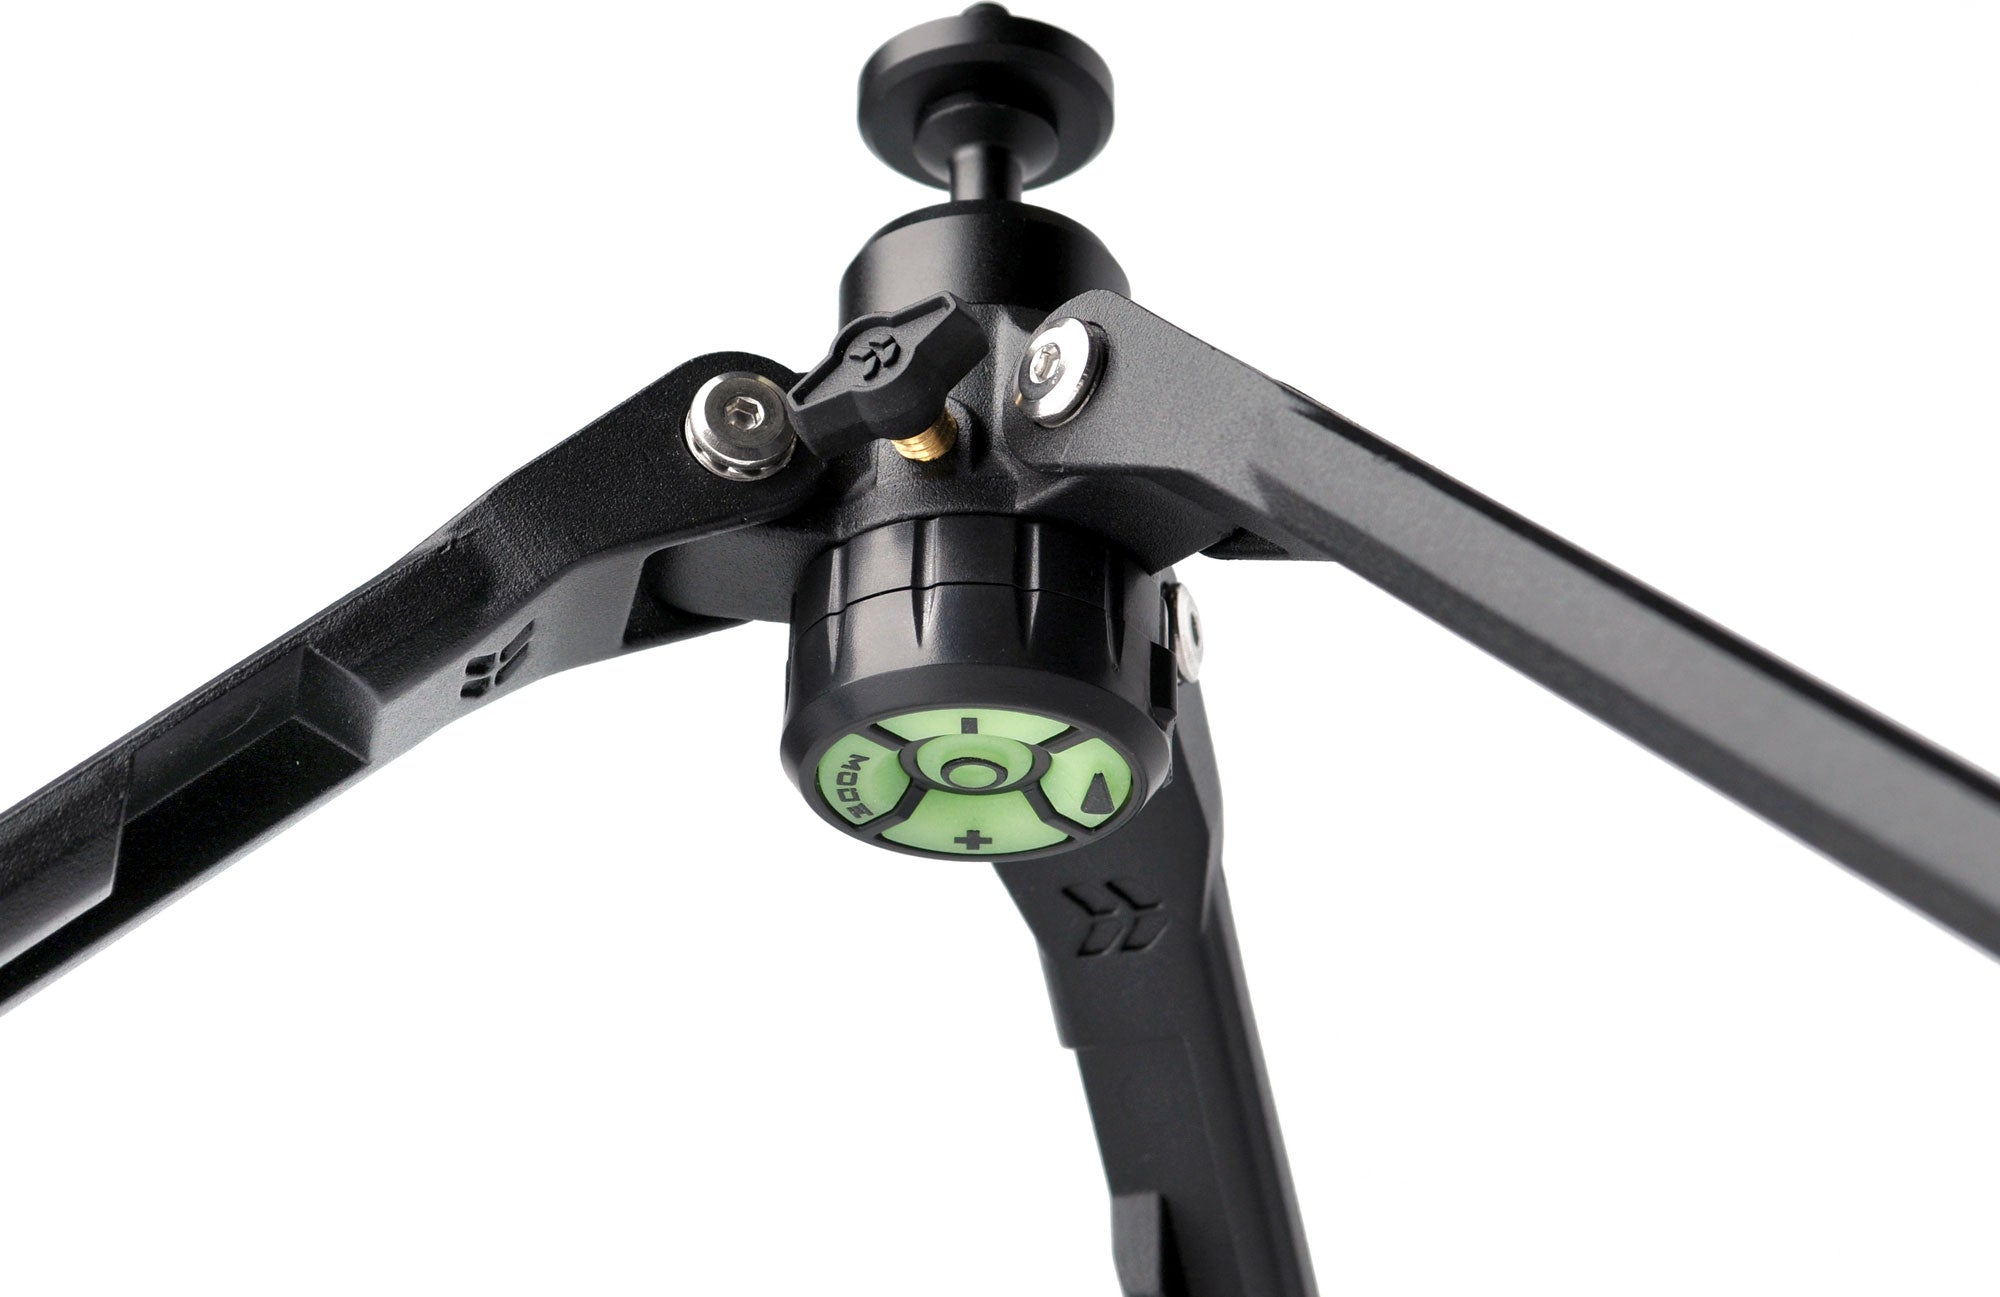 Remote magnetically attaches to bottom of tripod | FLi-PRO Telescoping Light by STKR Concepts